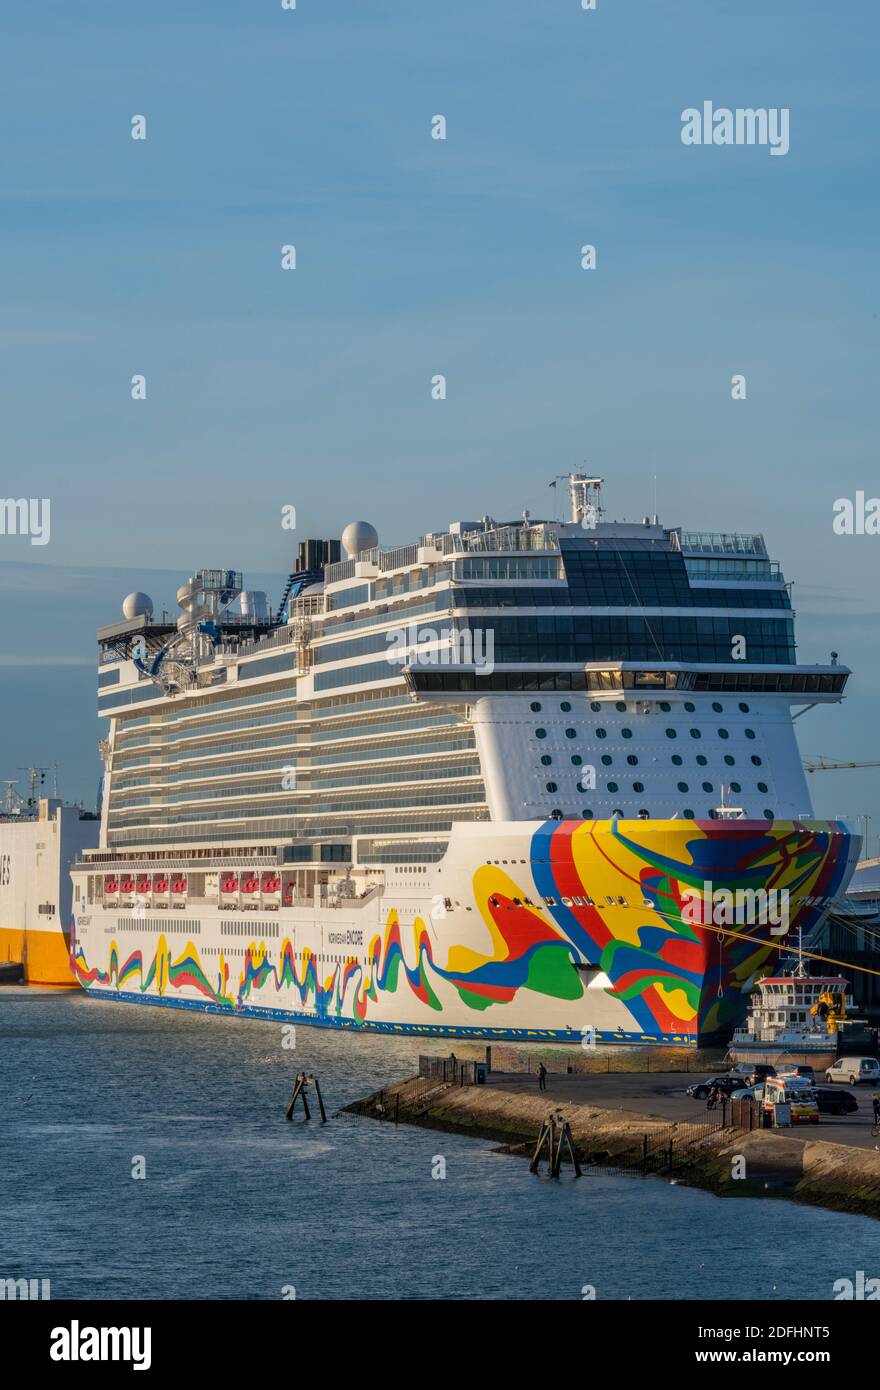 the carnival norwegian cruise liner ship norwegian encore at a berth in the port of southampton docks. Stock Photo